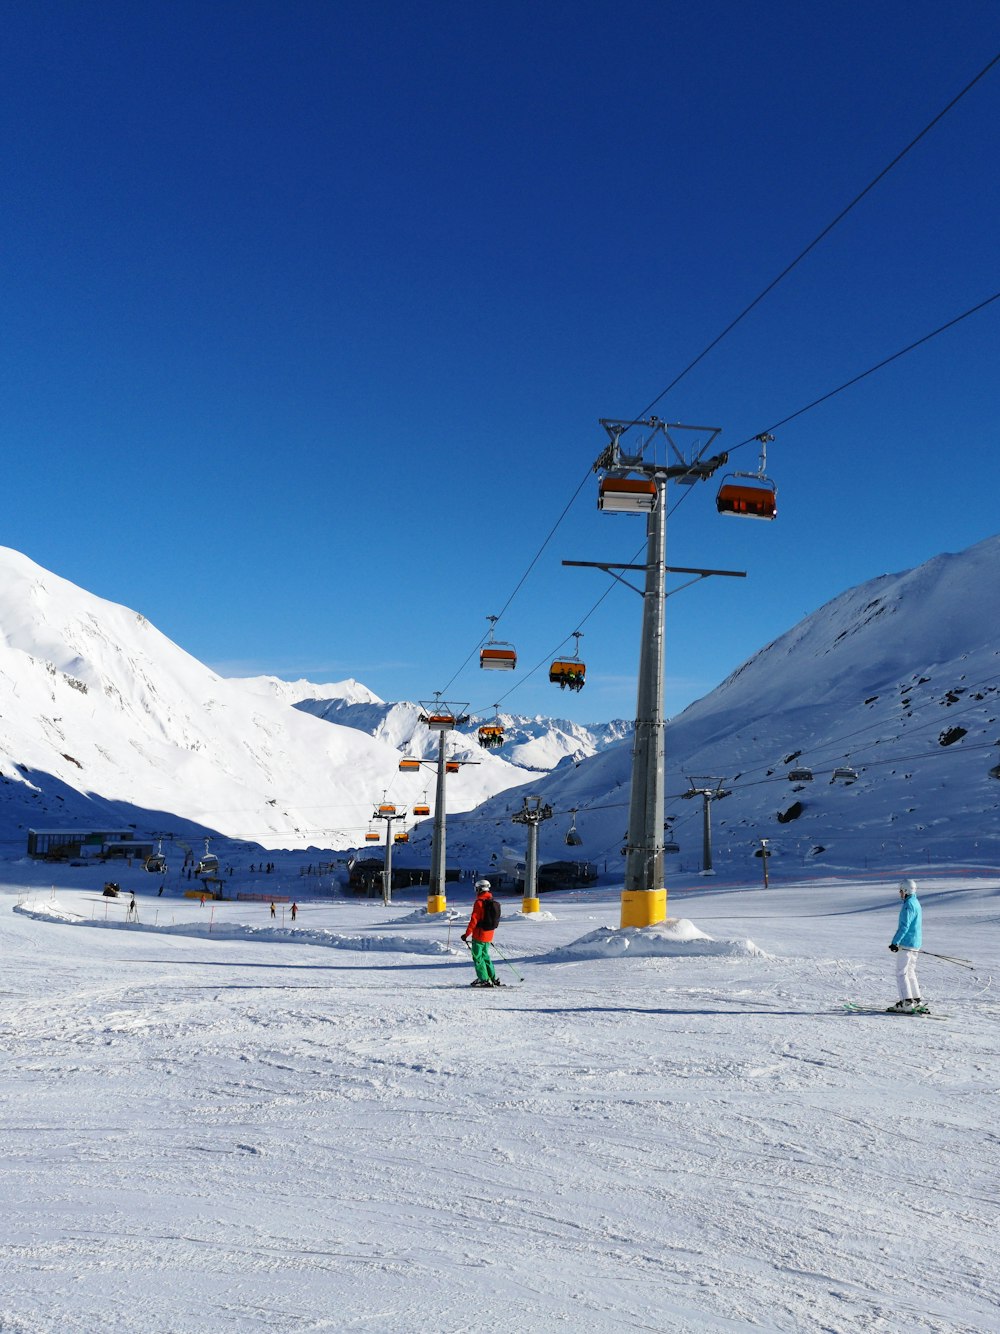 two people skiing on snowy slope under the ski lift